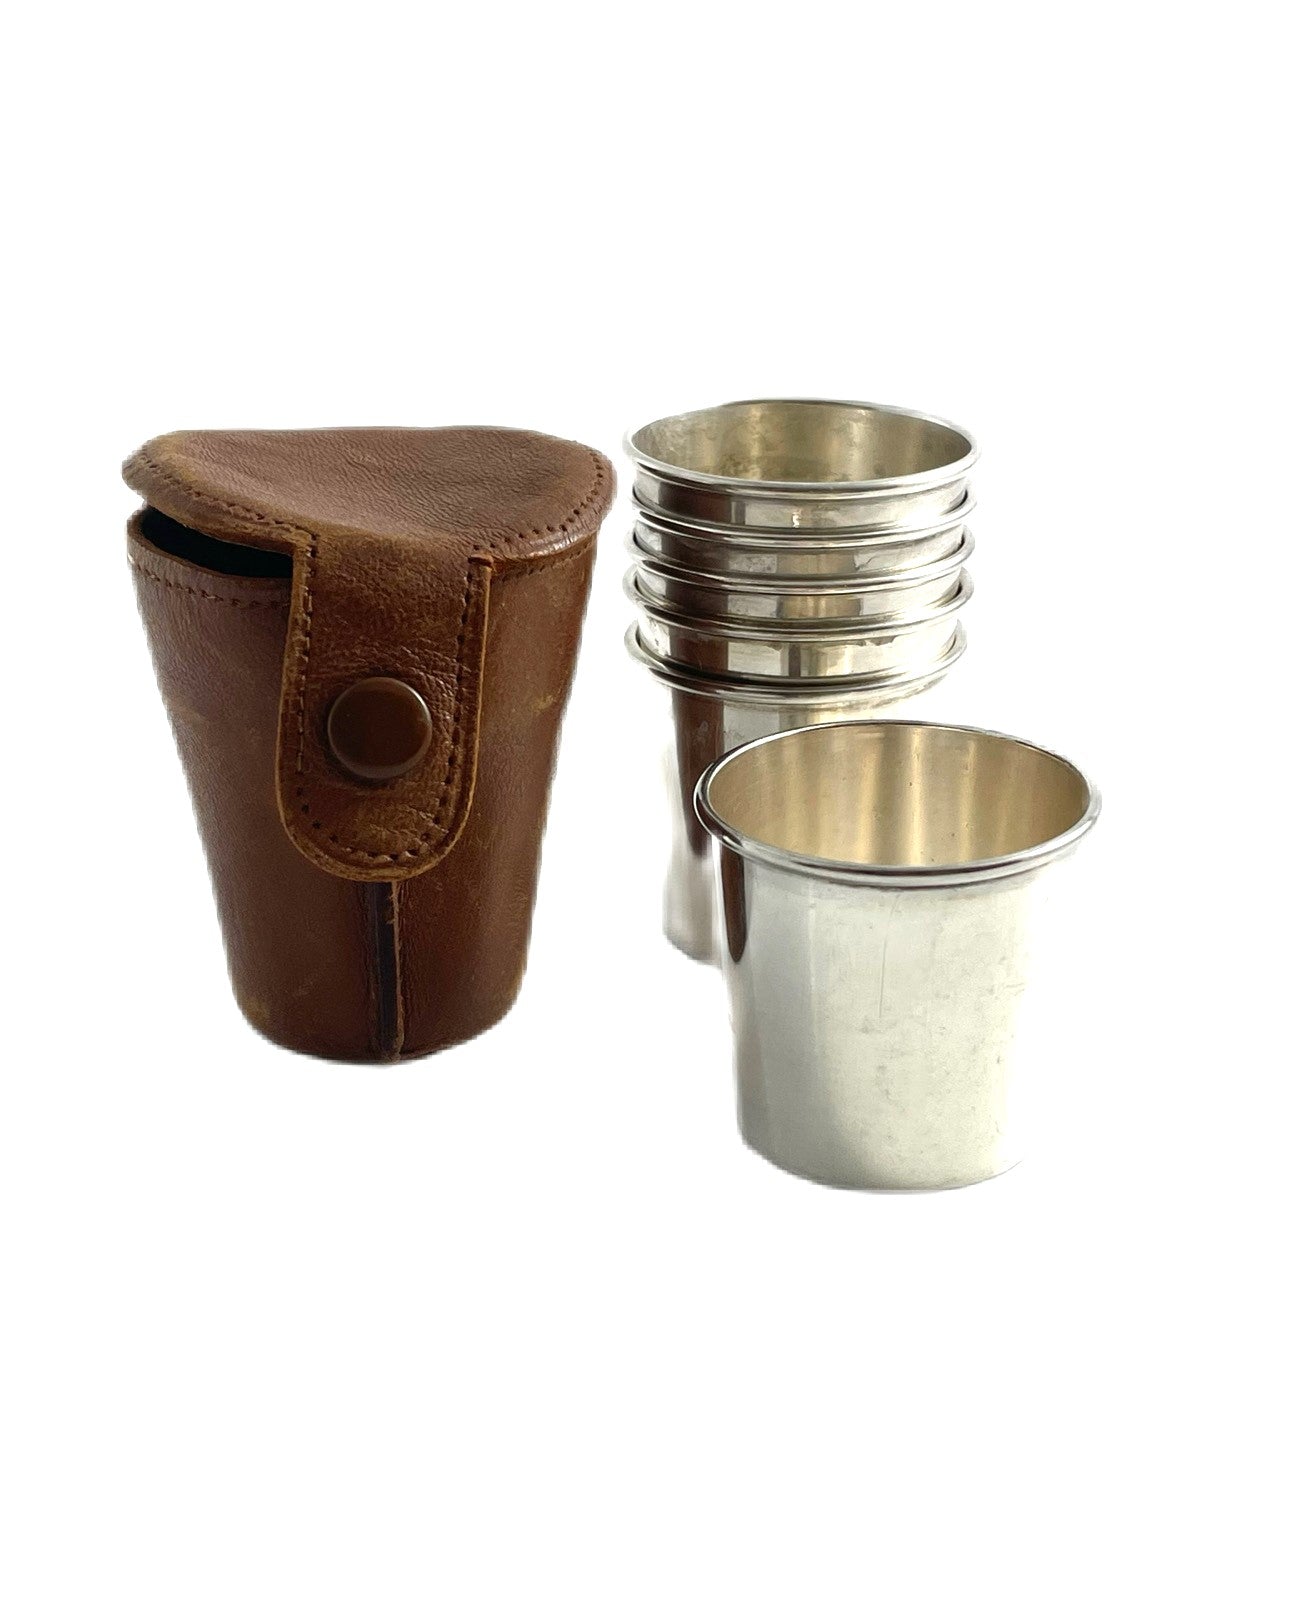 Sterling Silver Staking Shot Cups, Set of Six with Leather Case - 43 Chesapeake Court Antiuqes